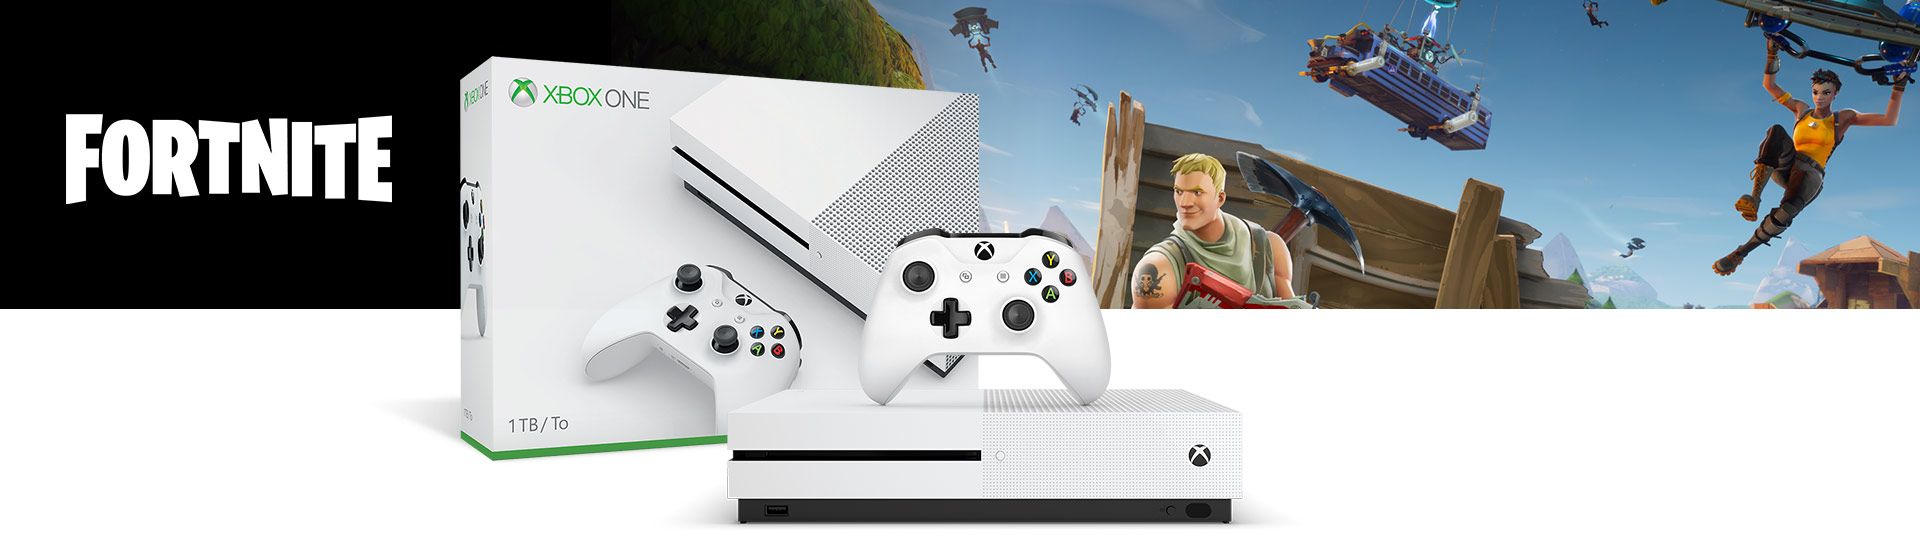 front view of xbox one s fortnite bundle with product box - xbox 1 fortnite free download